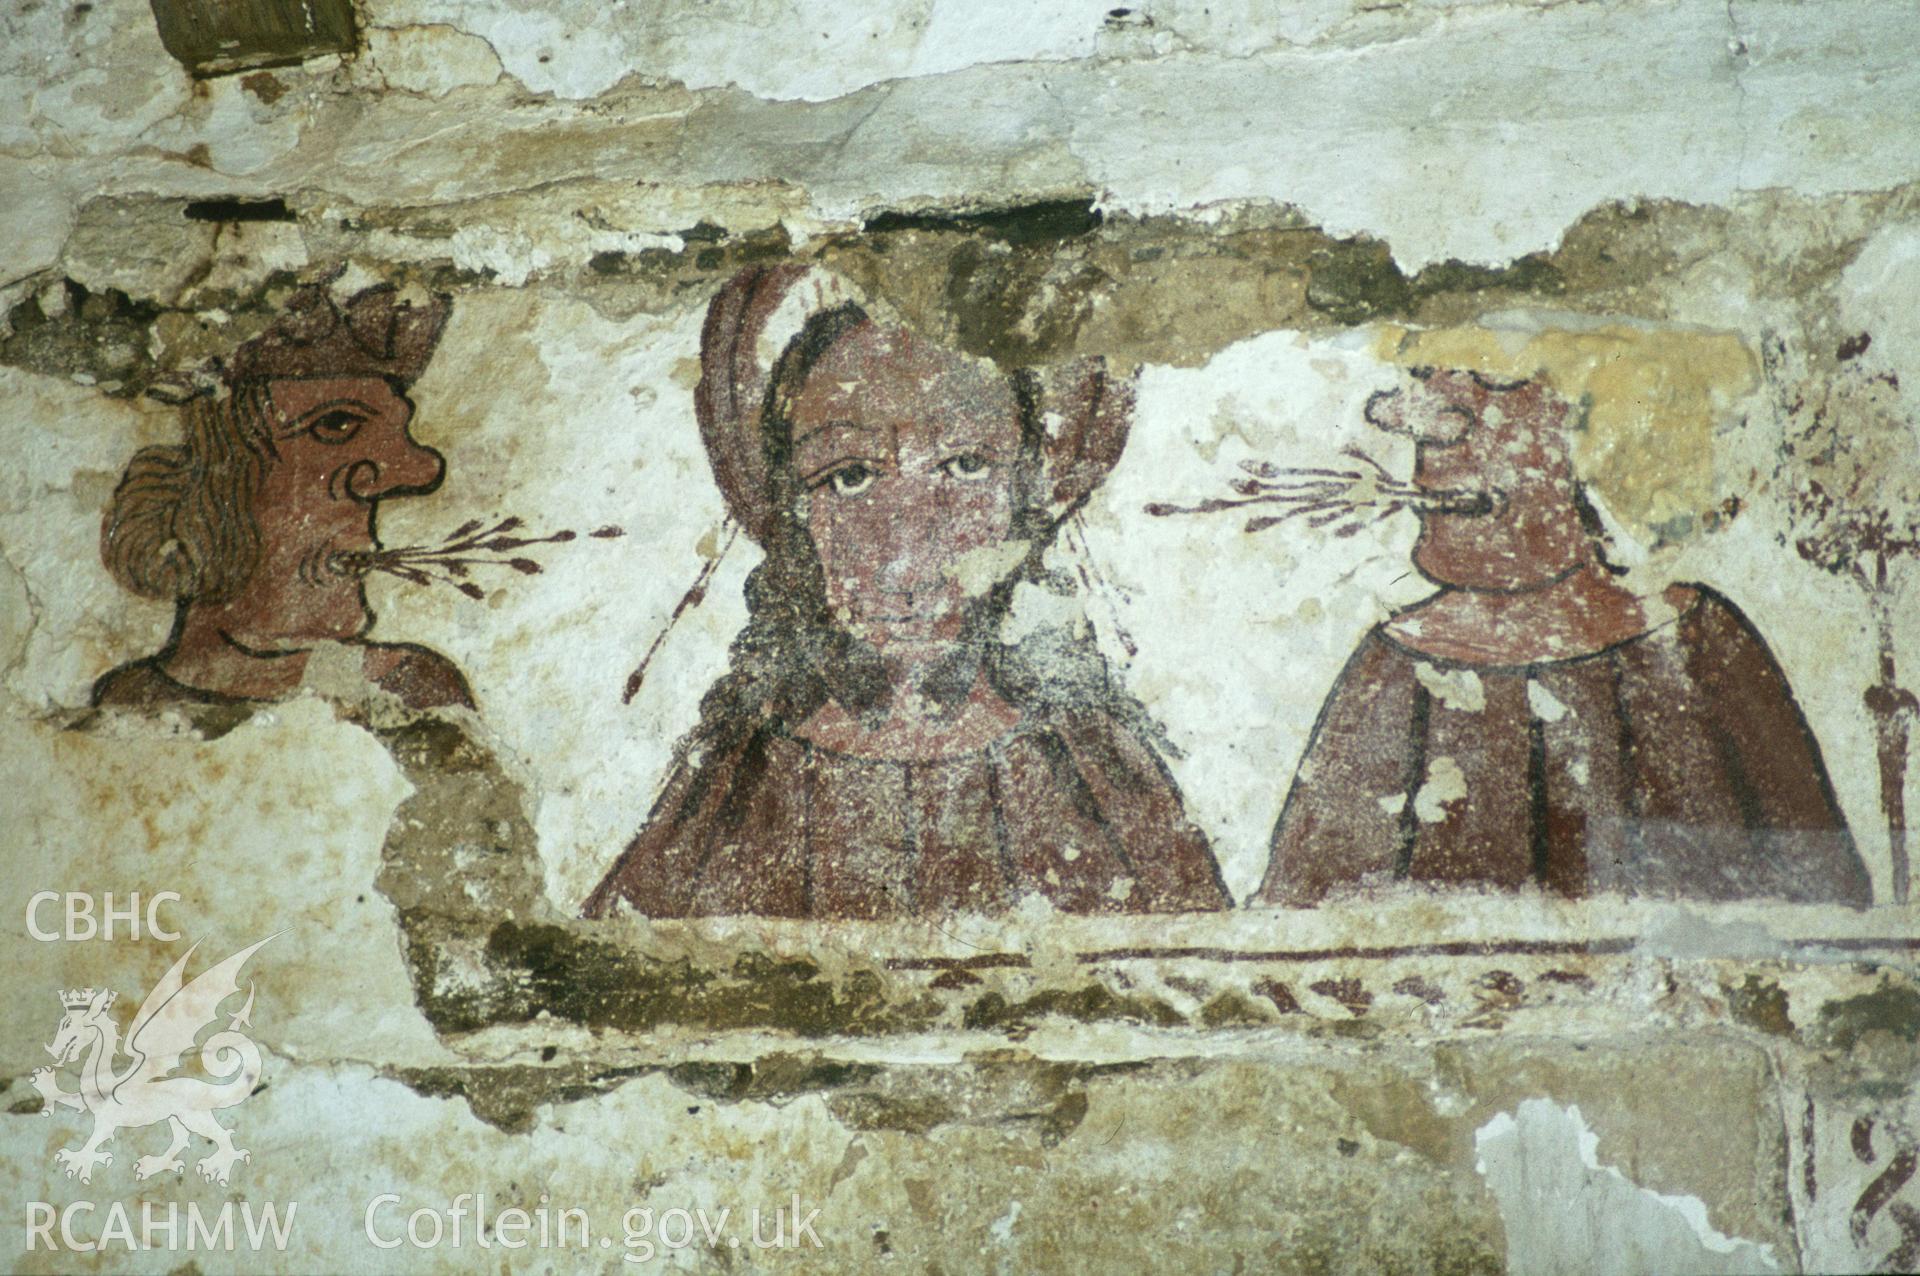 RCAHMW colour transparency showing view of the 'Scorning of Christ' wallpainting at St Teilo's Church, Llandeilo Talybont, photographed in 1984.